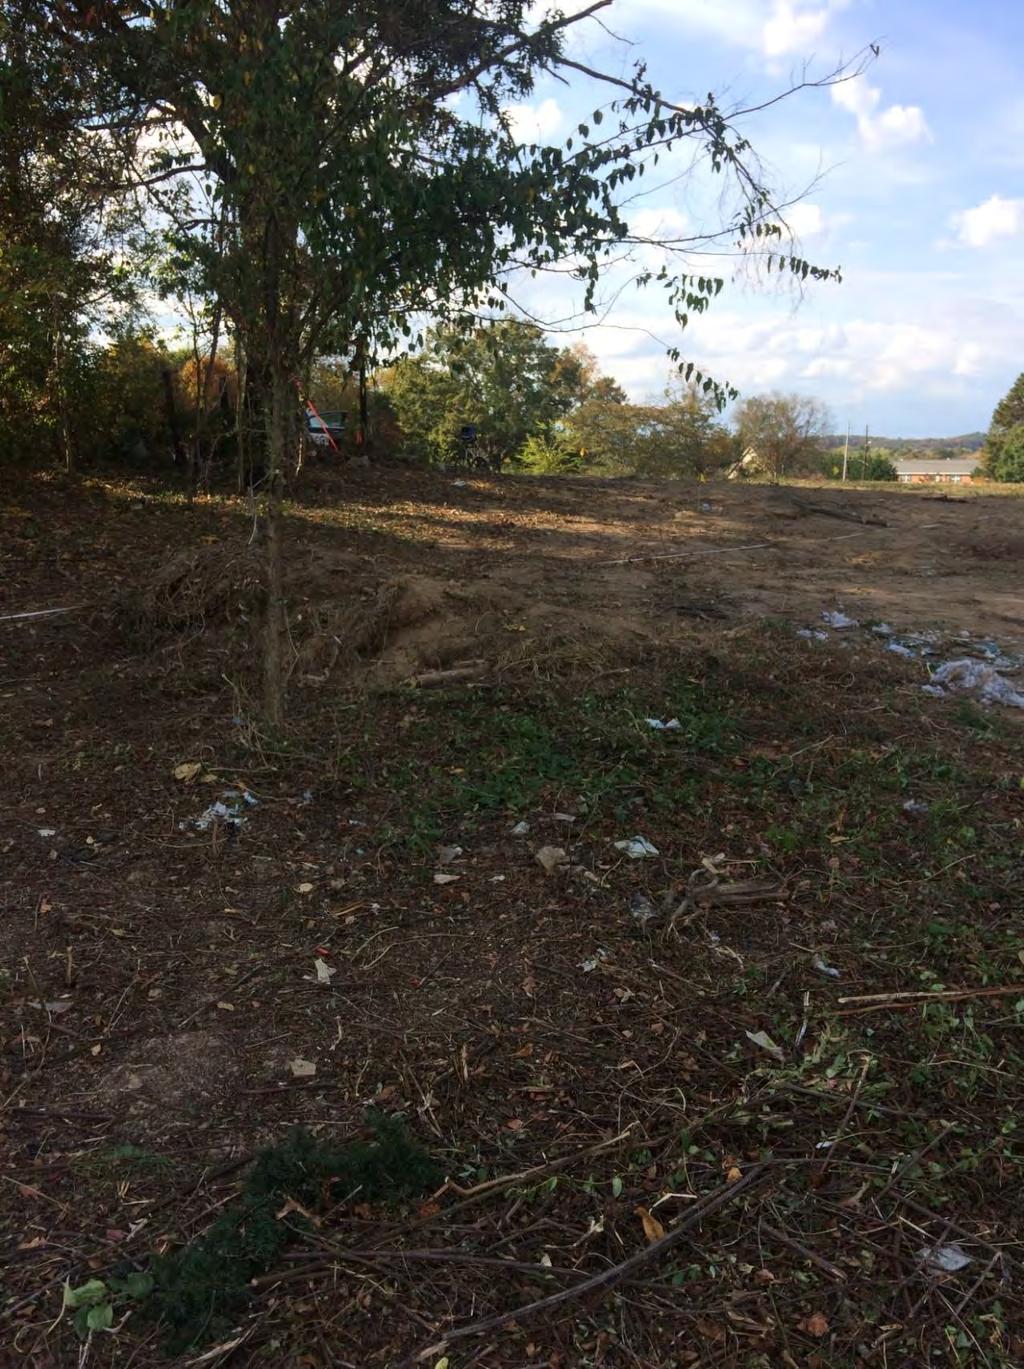 13 Figure 9: View of small dirt pile and scattering of modern trash and metal debris